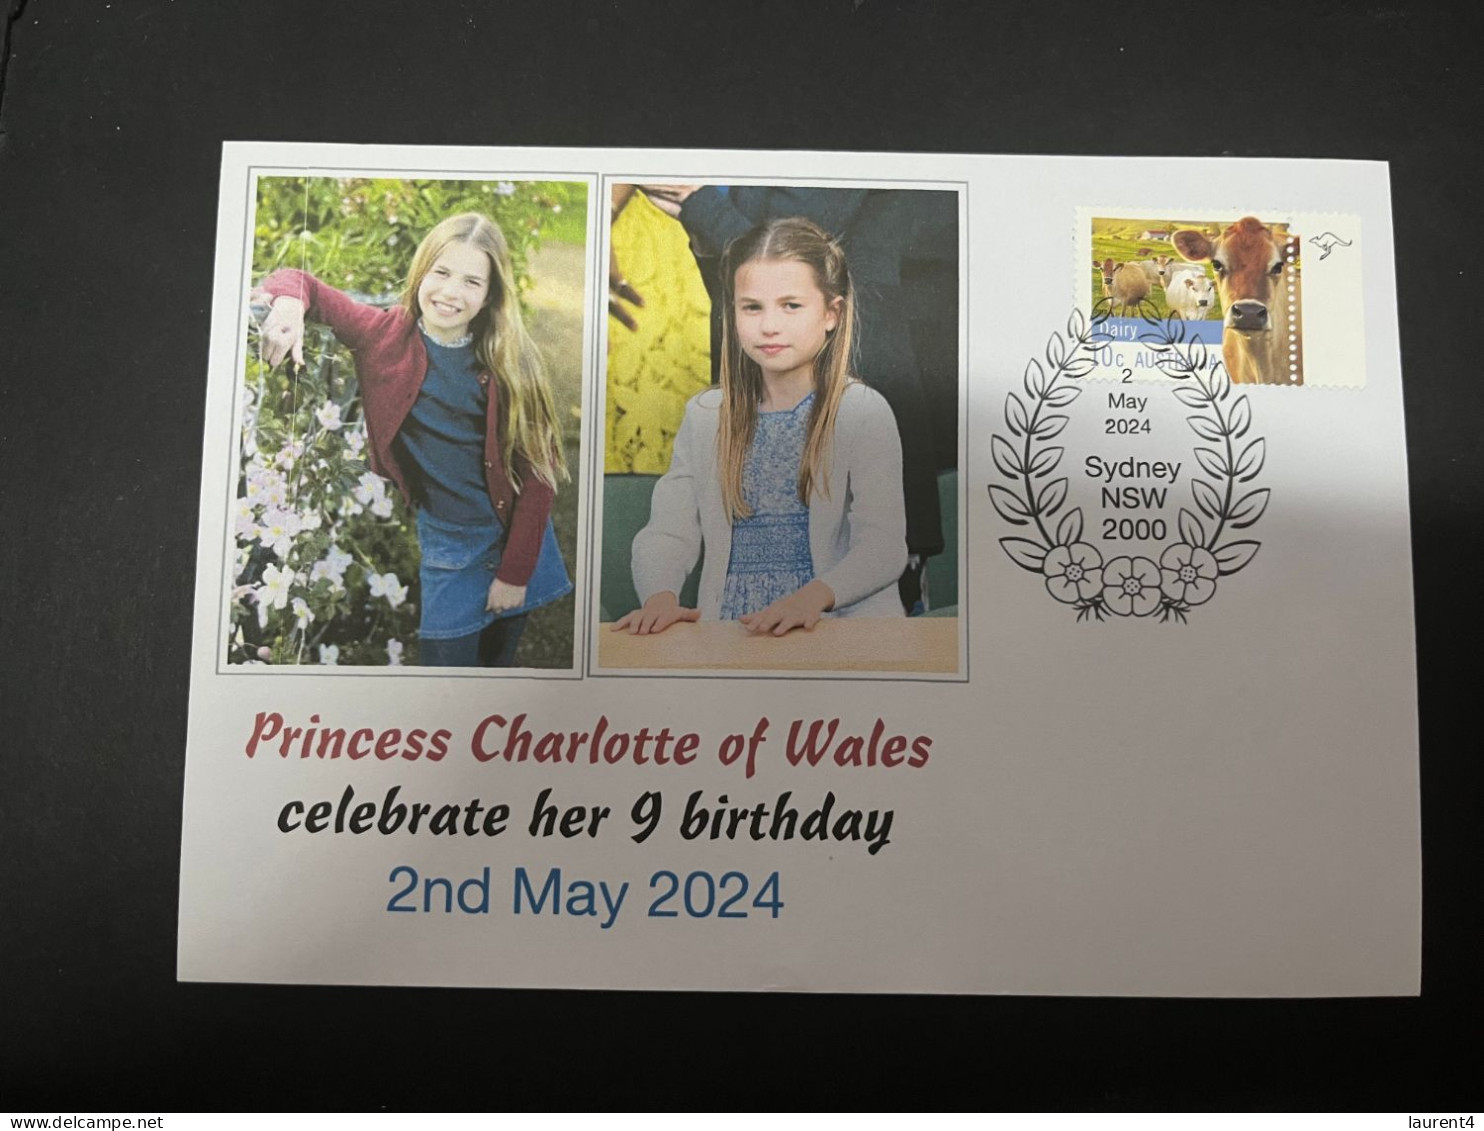 4-5-2024 (4 Z 7) Princess Charlotte Of Wales Celebrate Her 9th Birthday (2nd May 2024) With OZ Stamp - Familias Reales